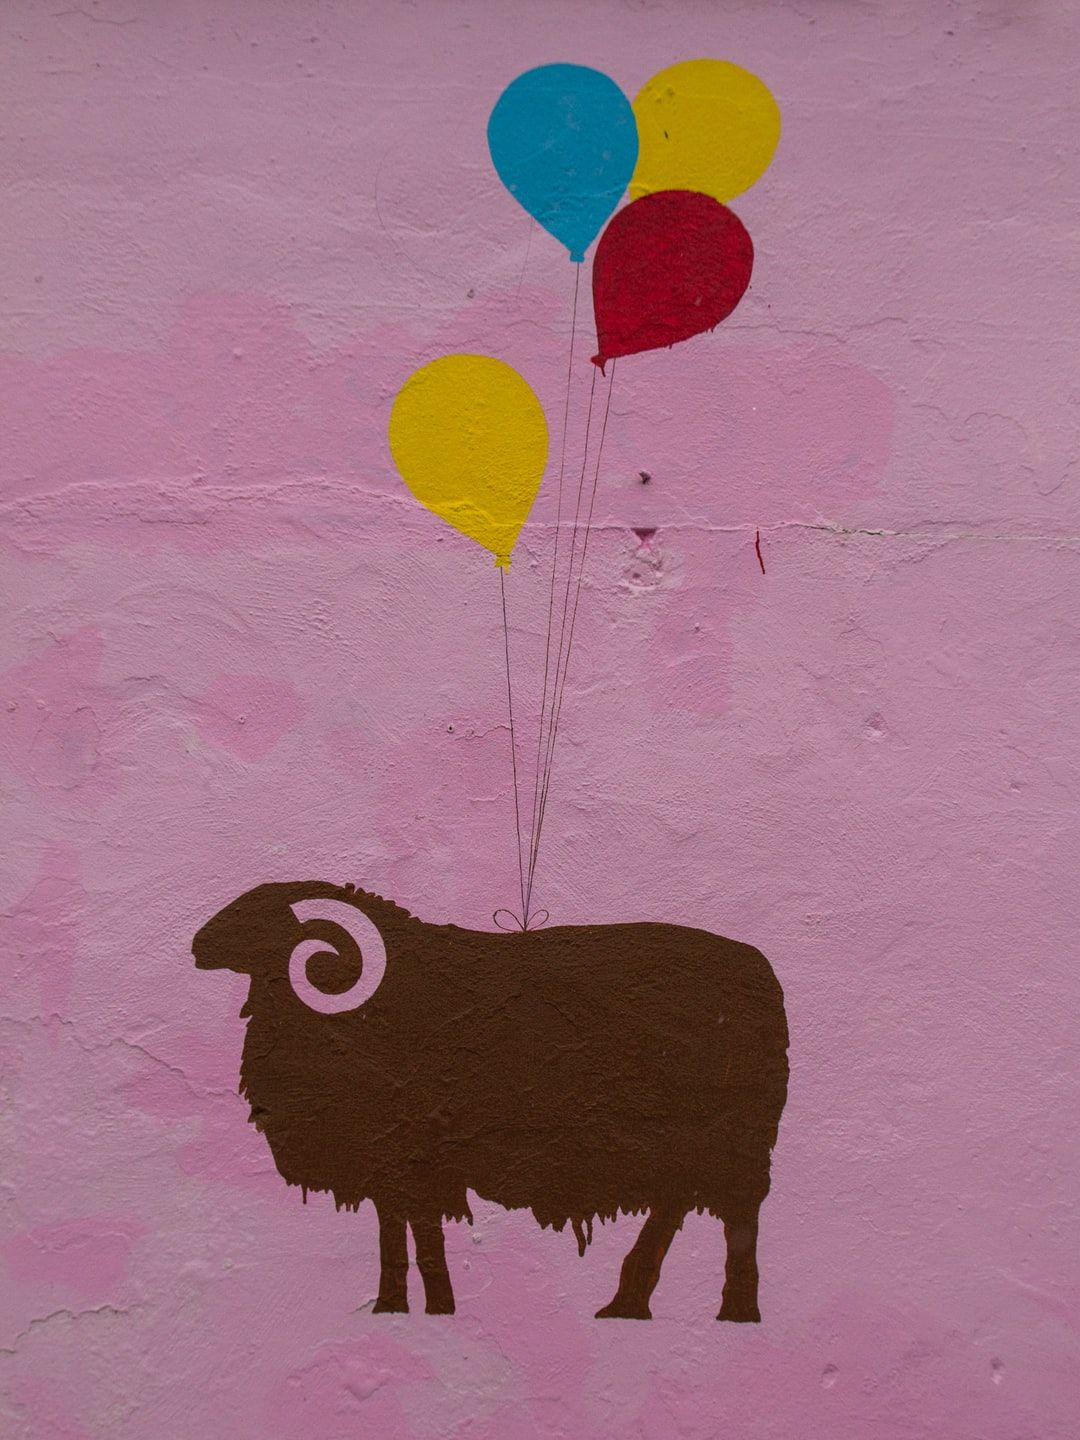 black animal with balloons painting .com